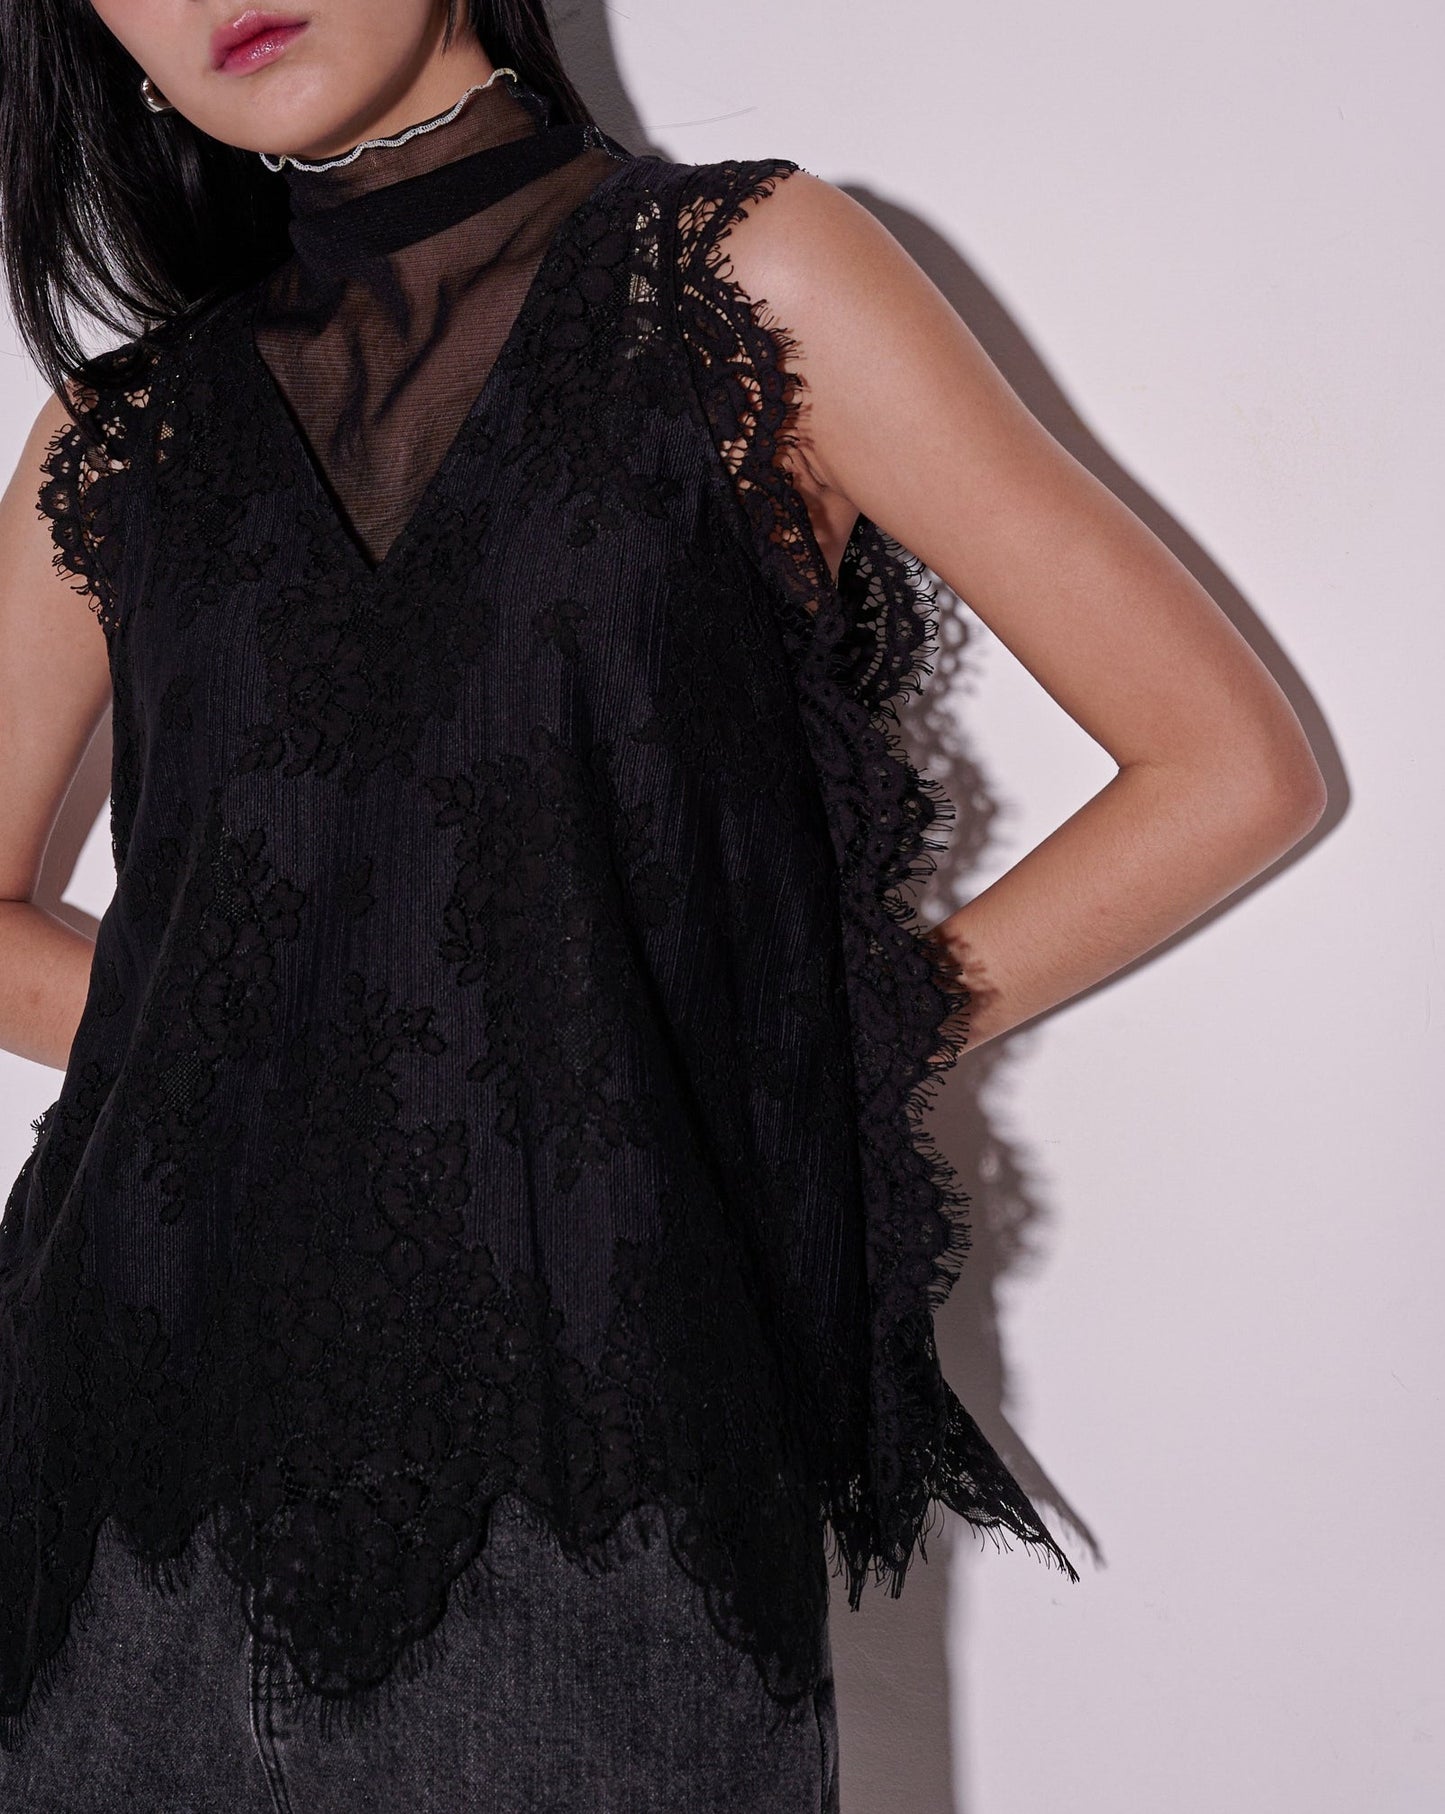 aalis HERMA v neck a line lace top (Black)